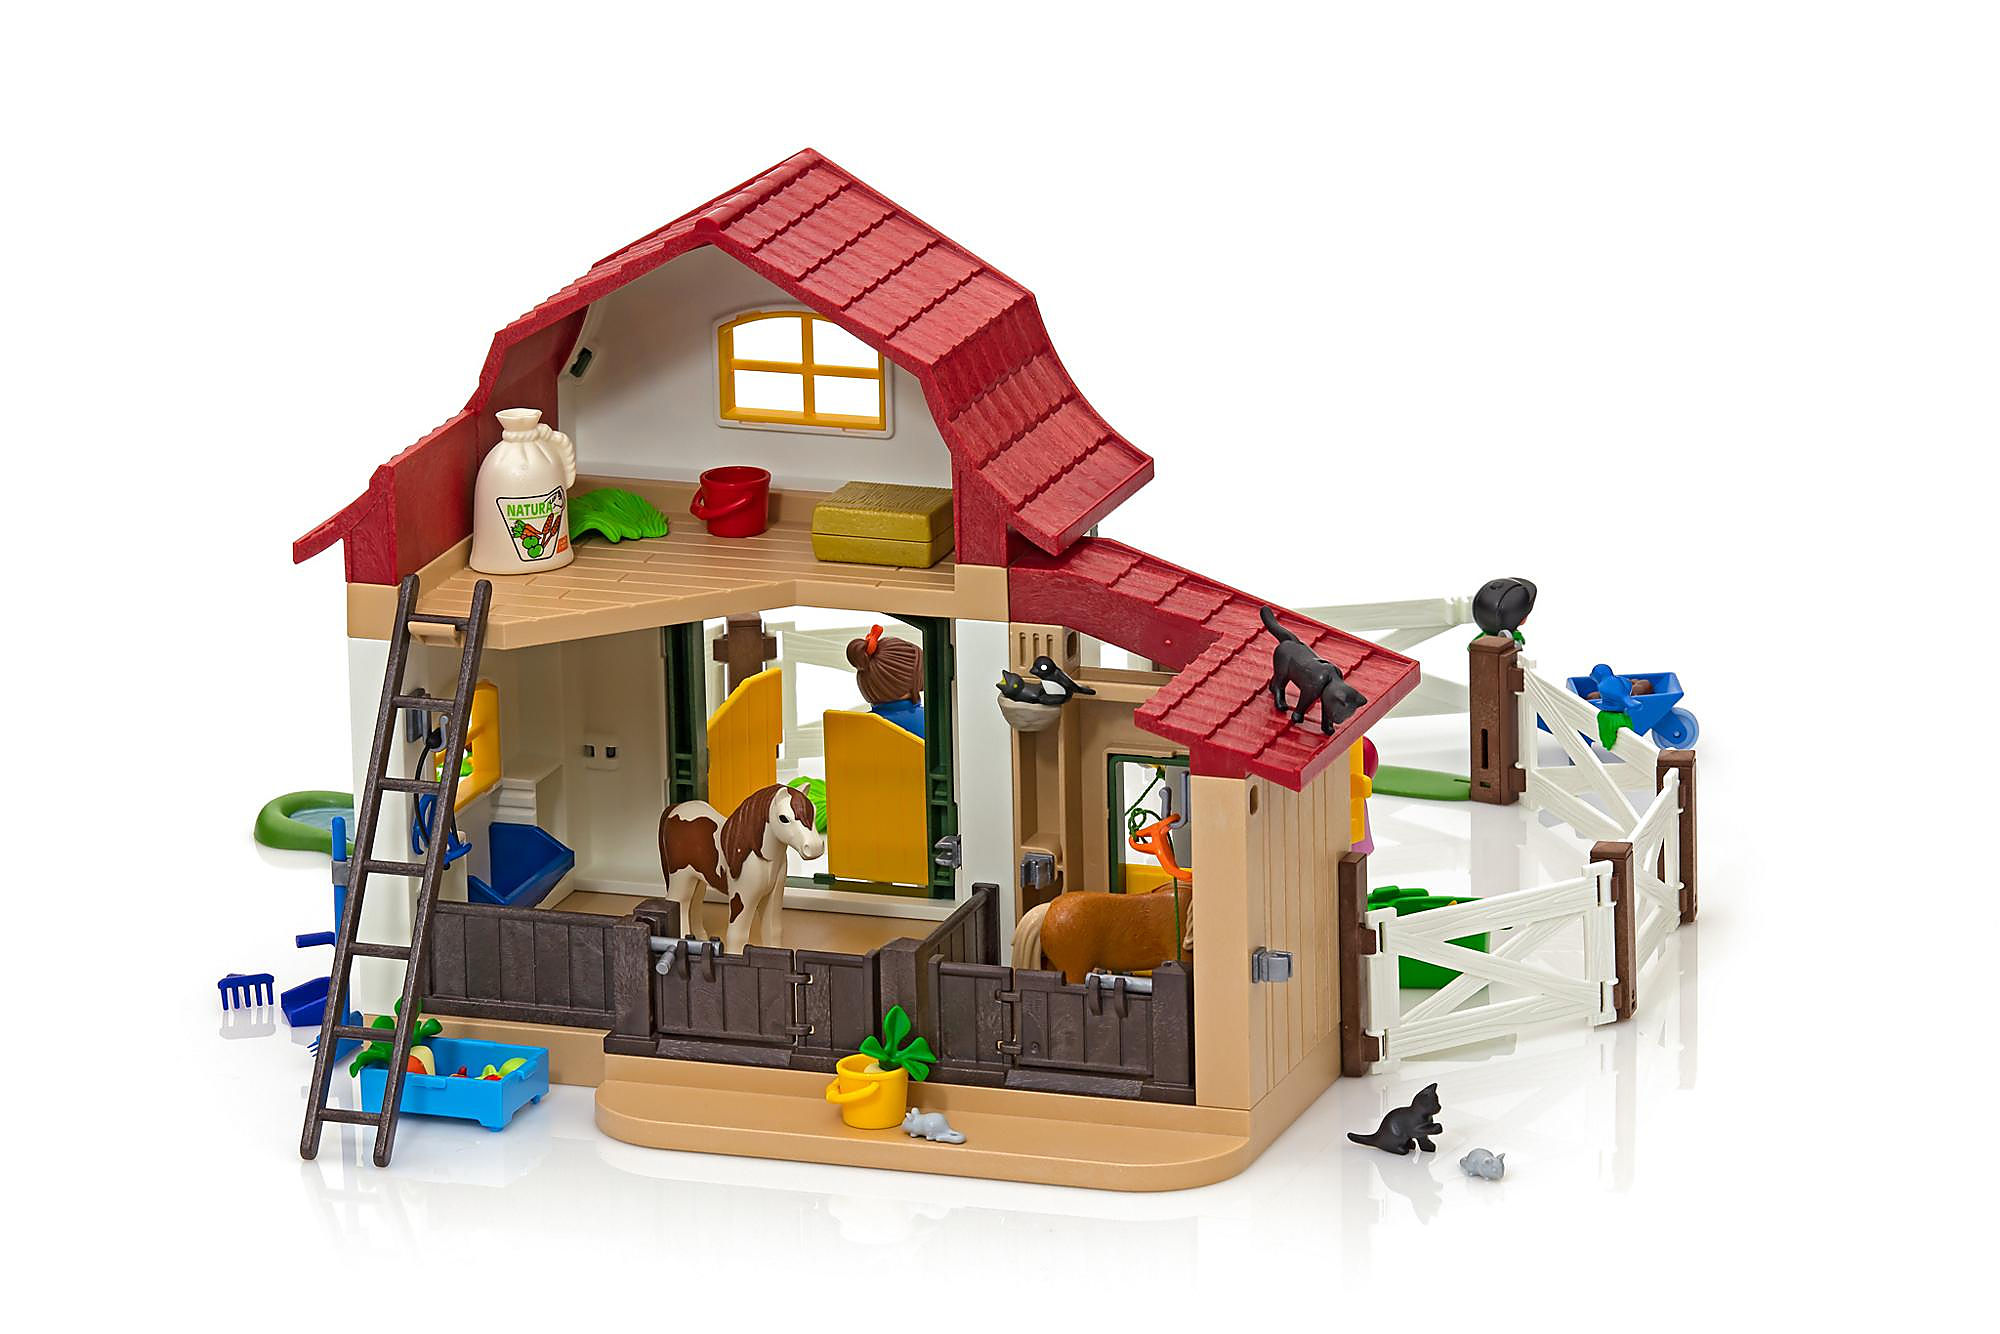 Playmobil 6927 Country Pony Farm For Sale in Citheroe, Lancashire